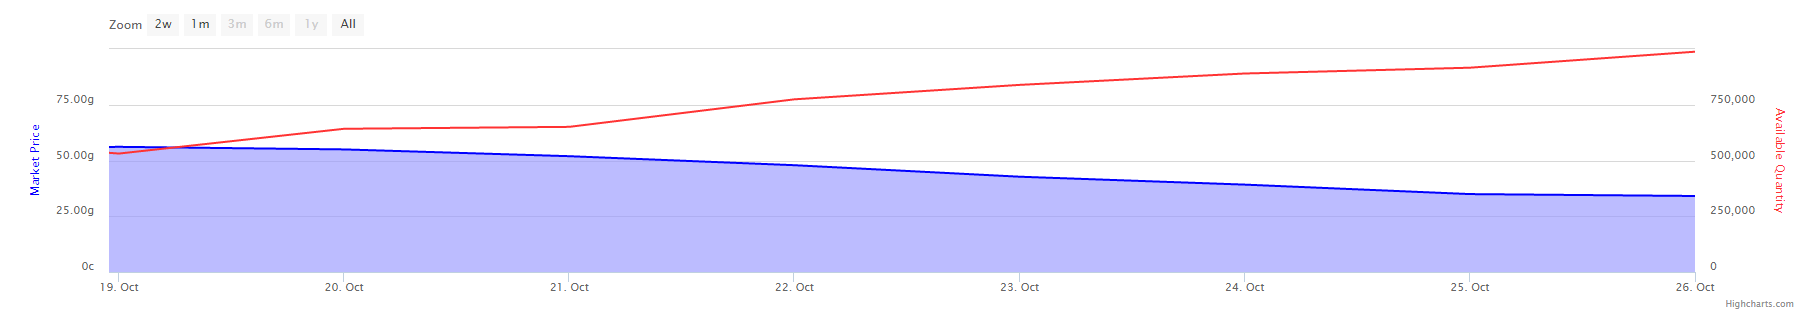 US Foxflower amounts and price, last 7 days. Taken from www.theunderminejournal.com